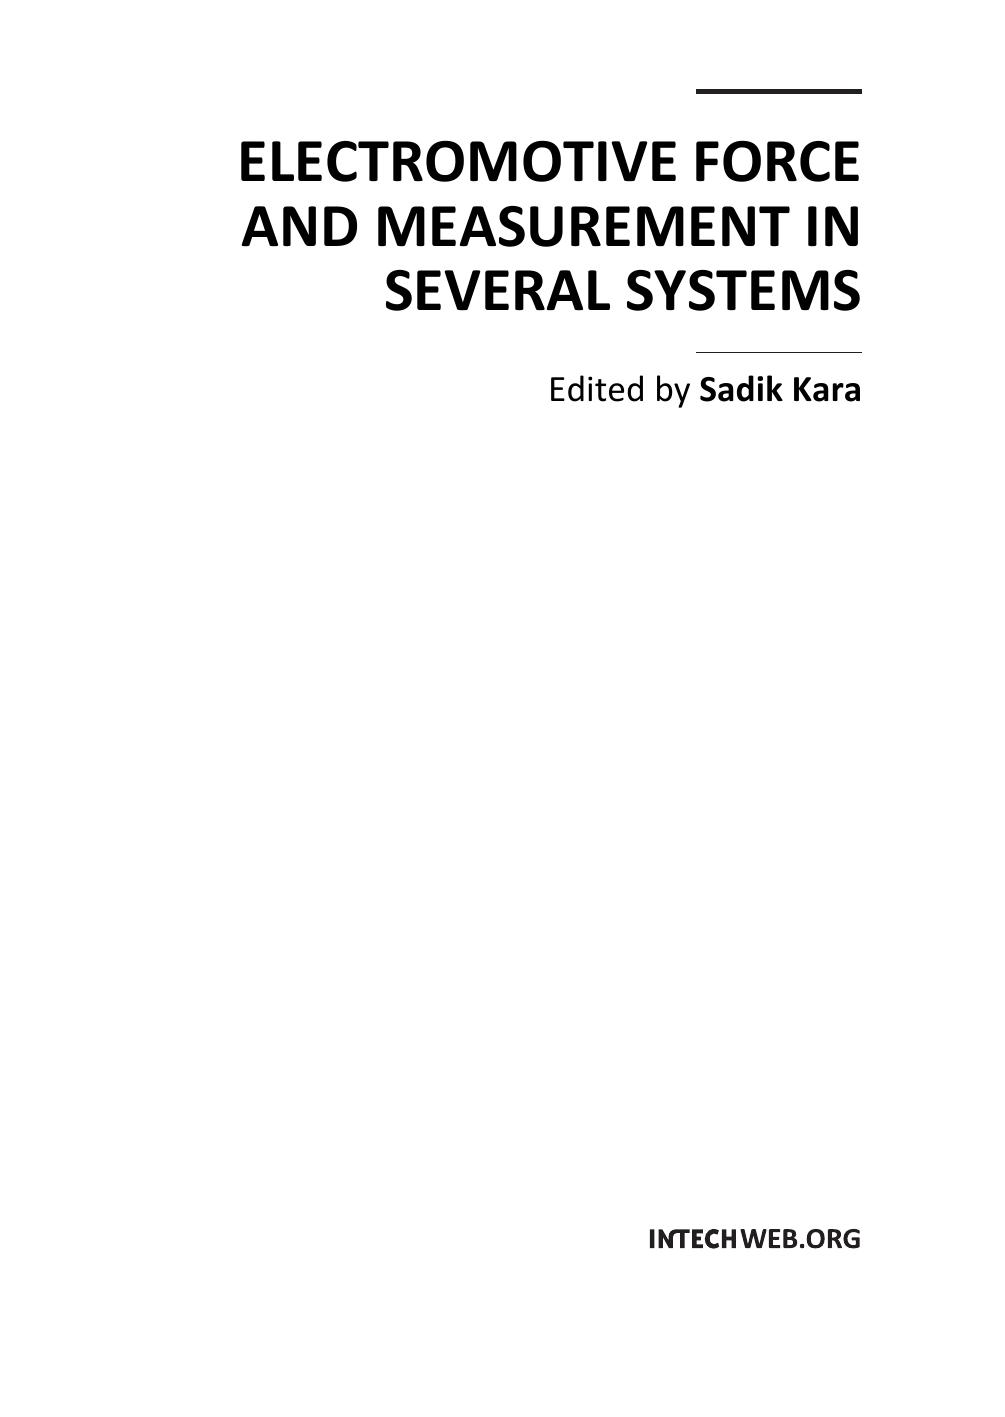 Electromotive Force and Measurement in Several Systems 2011.pdf